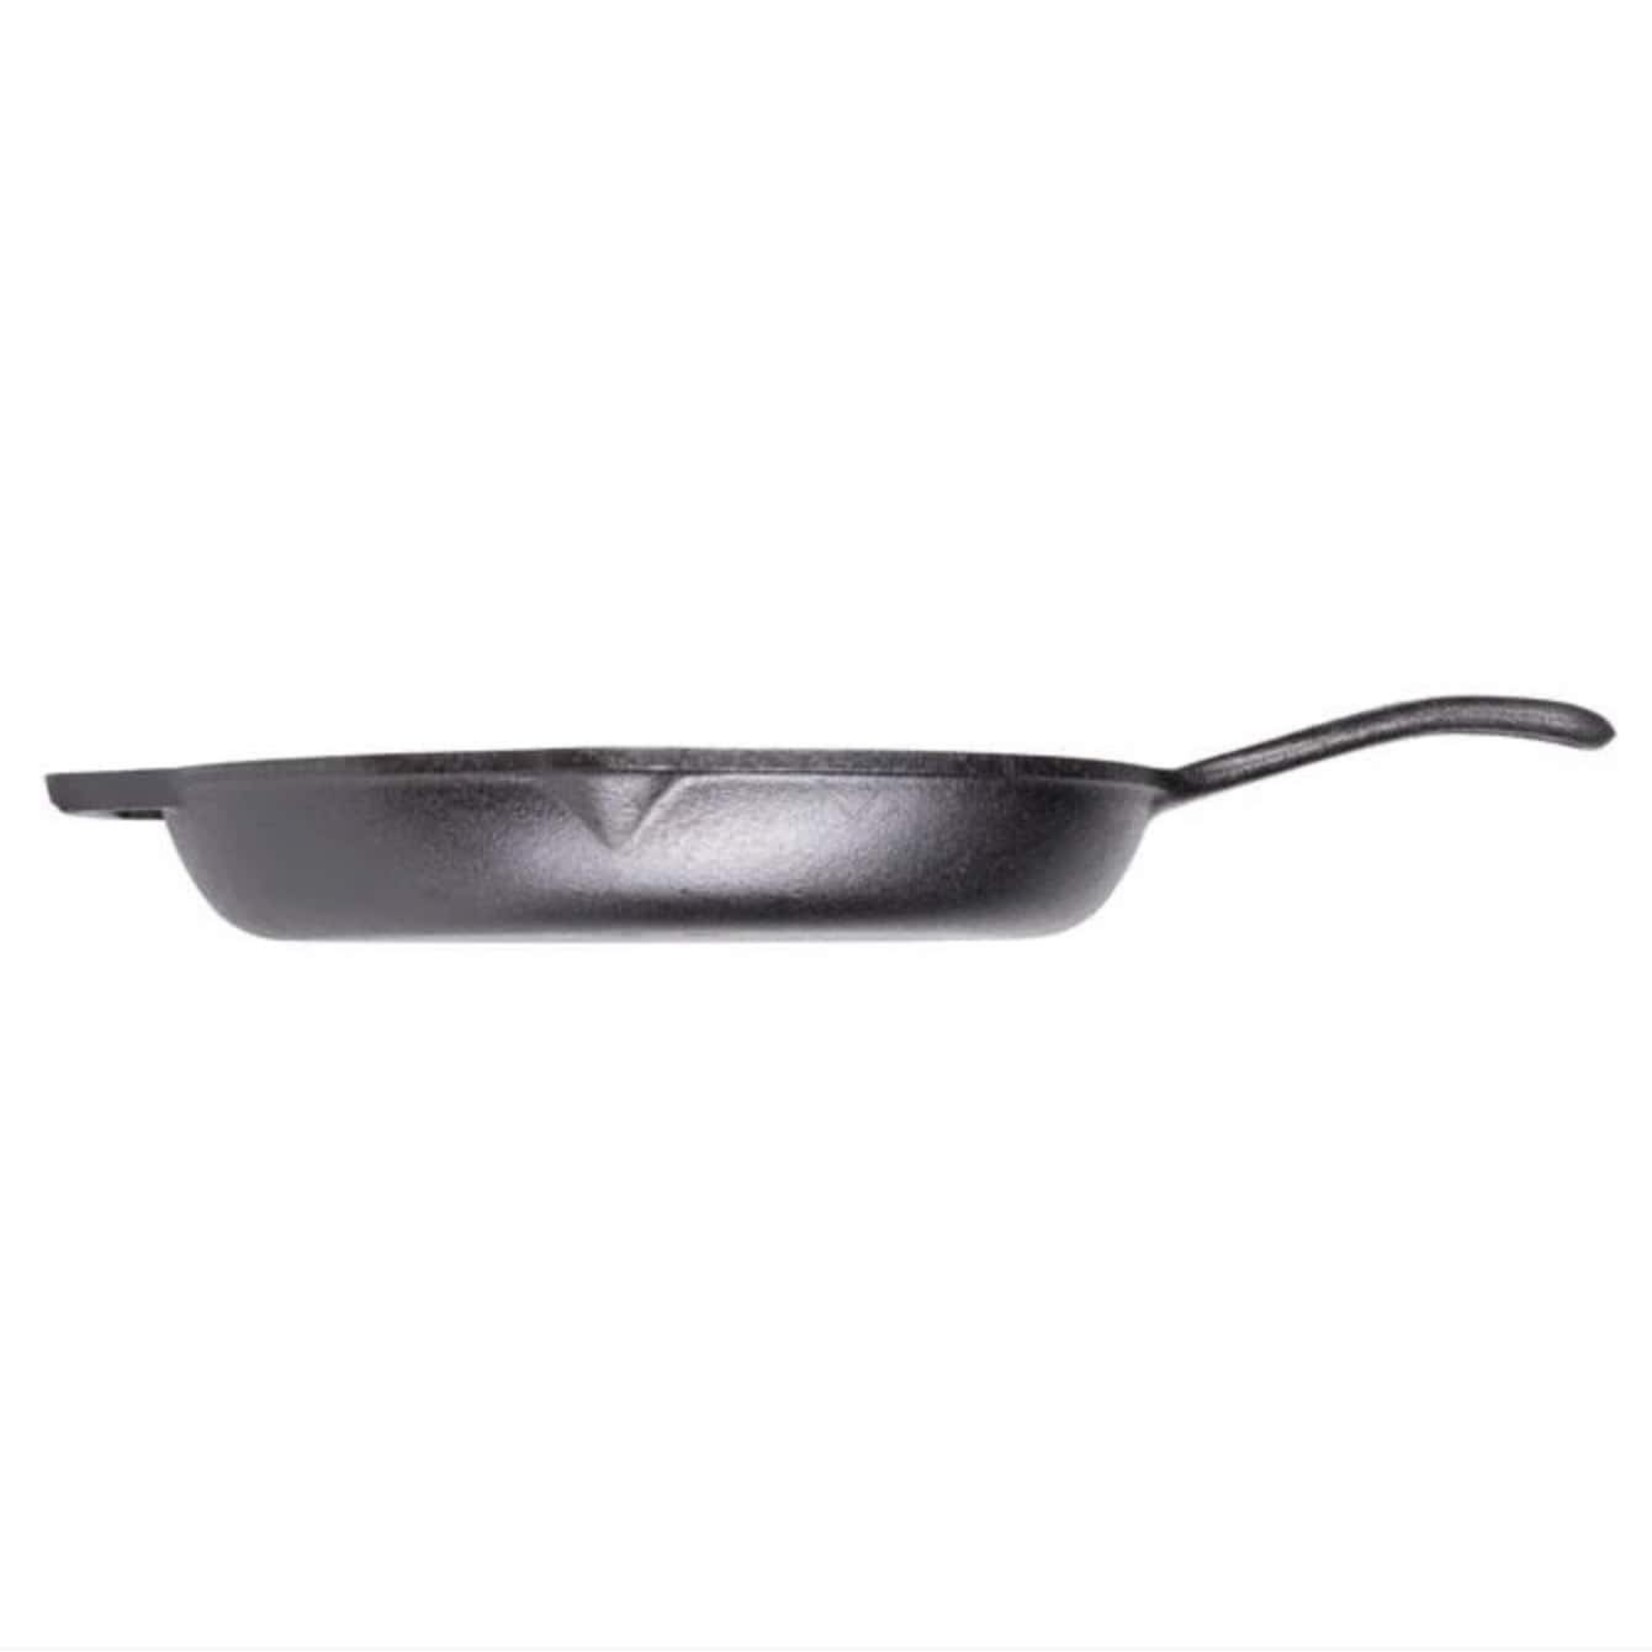 LODGE LODGE Chef Collection Skillet 12''